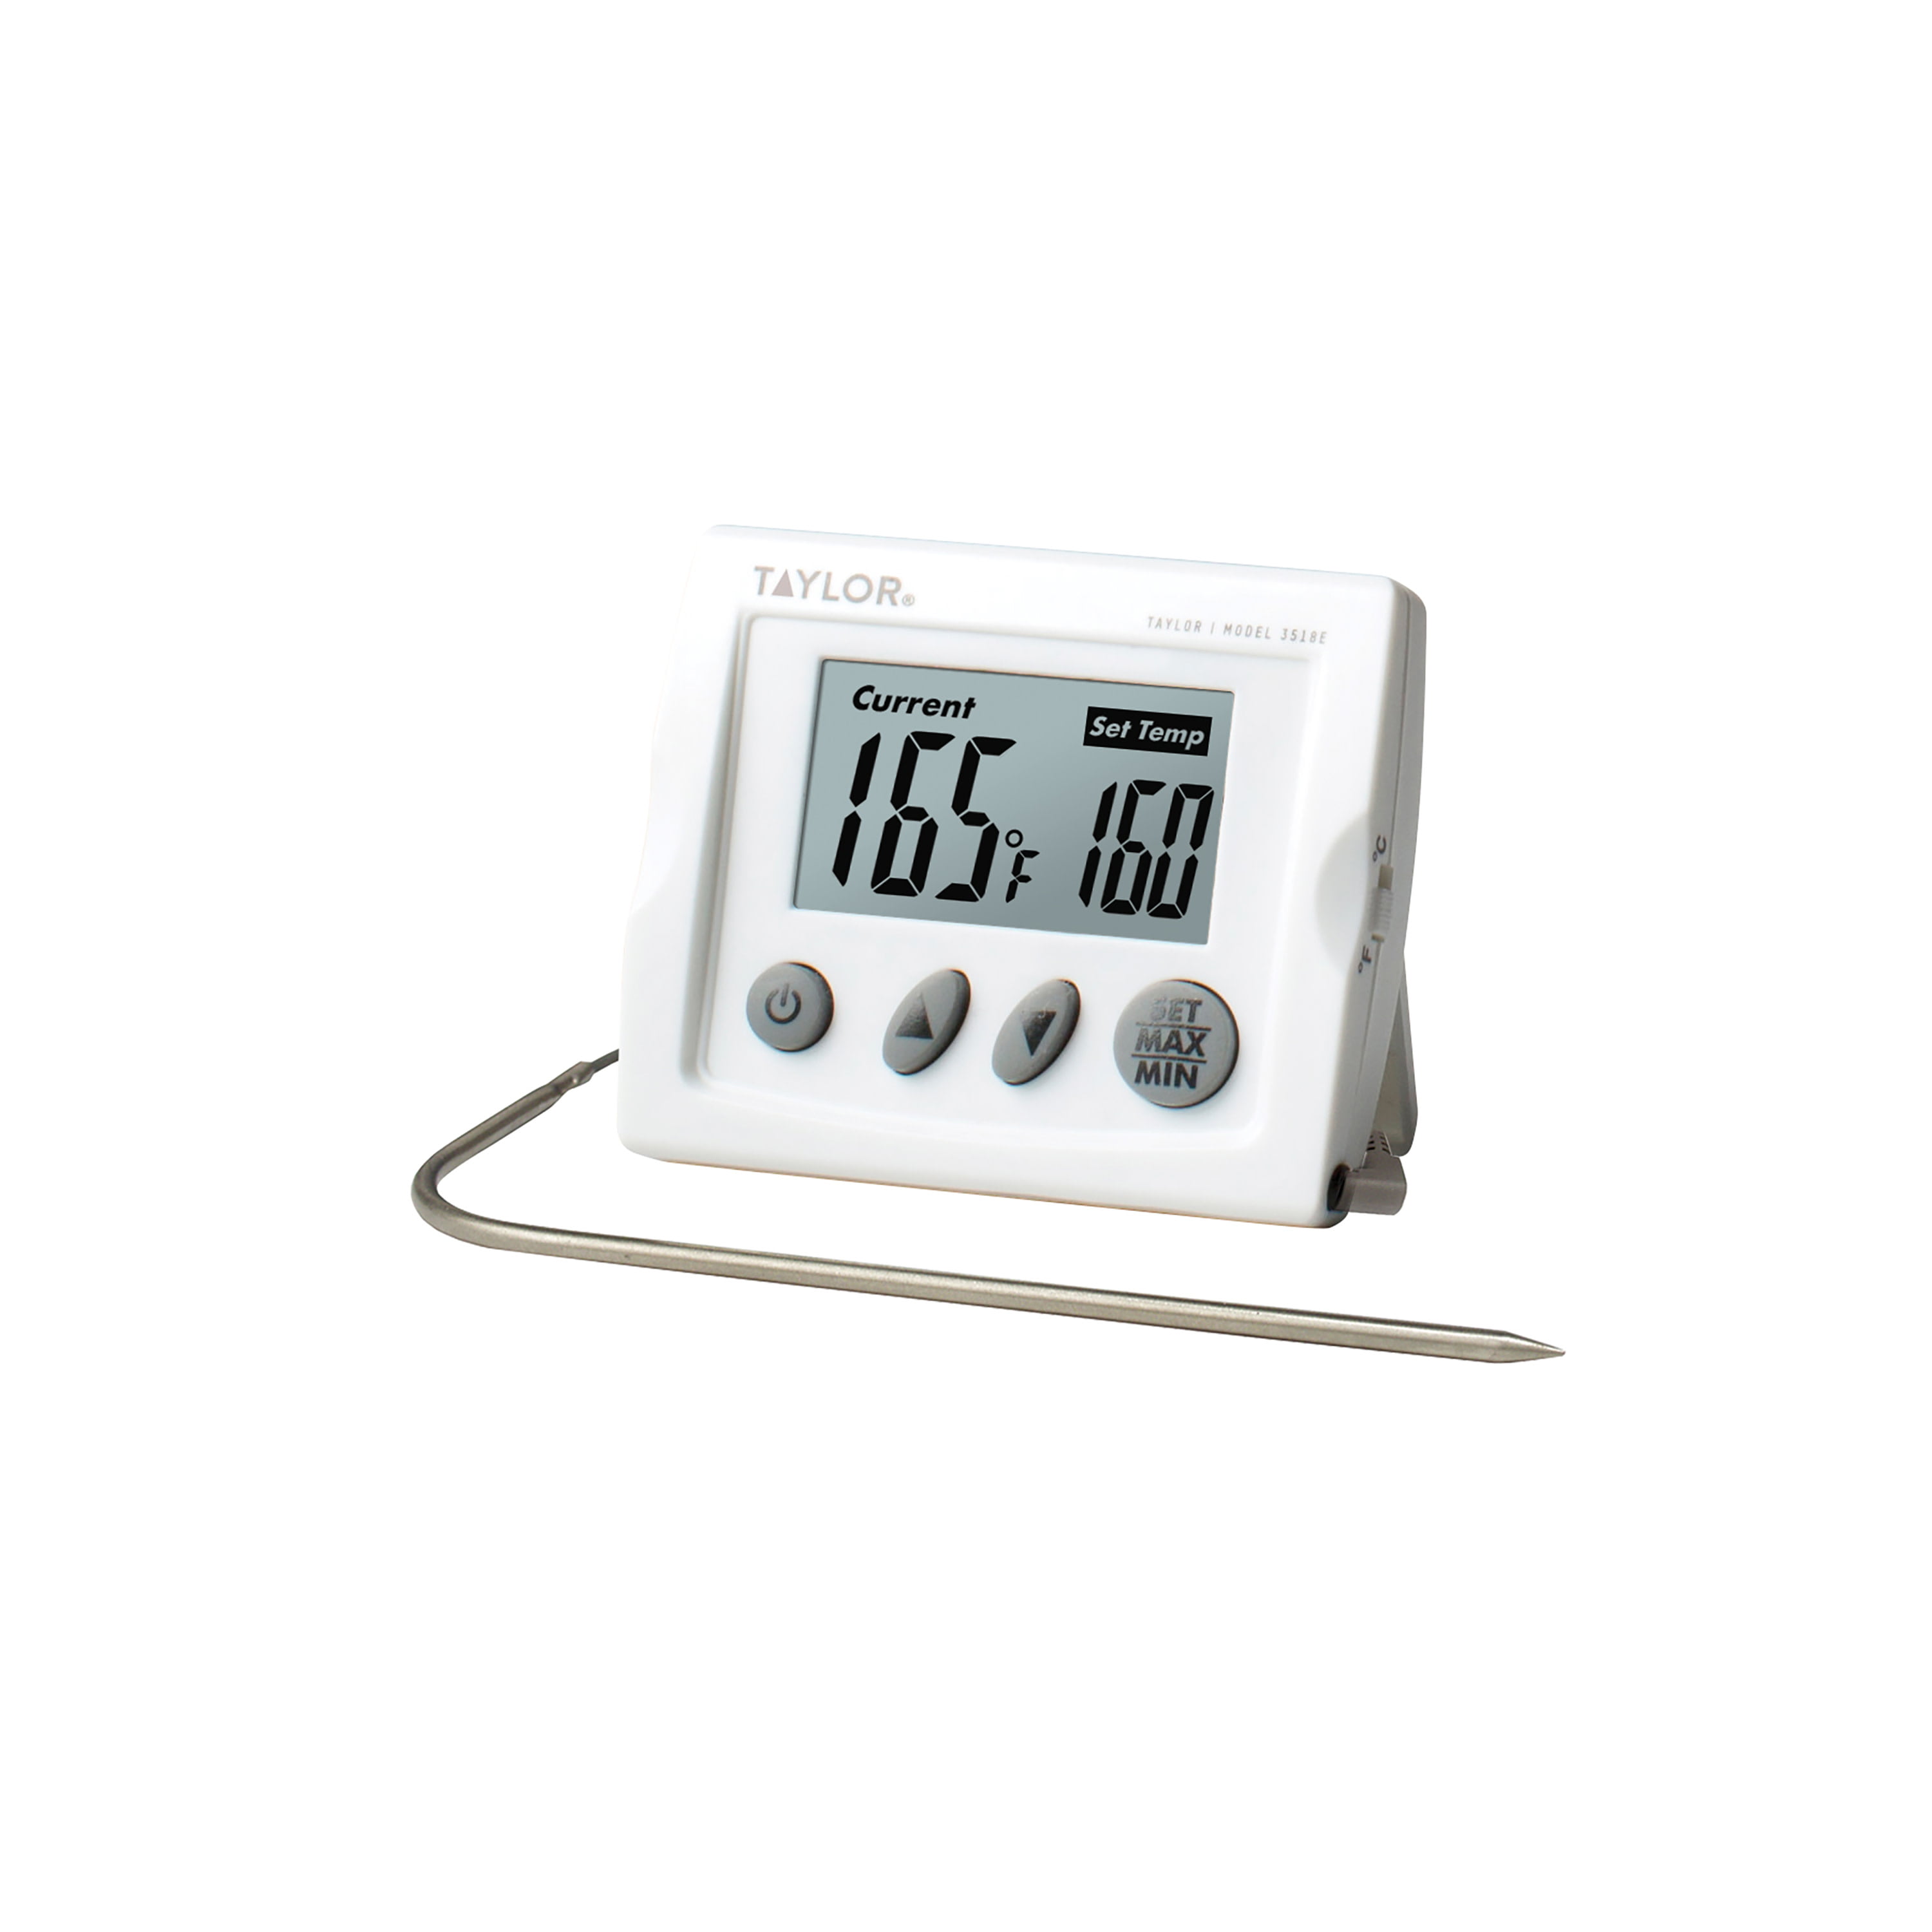 Digital Probe Wire Thermometer, 3518N